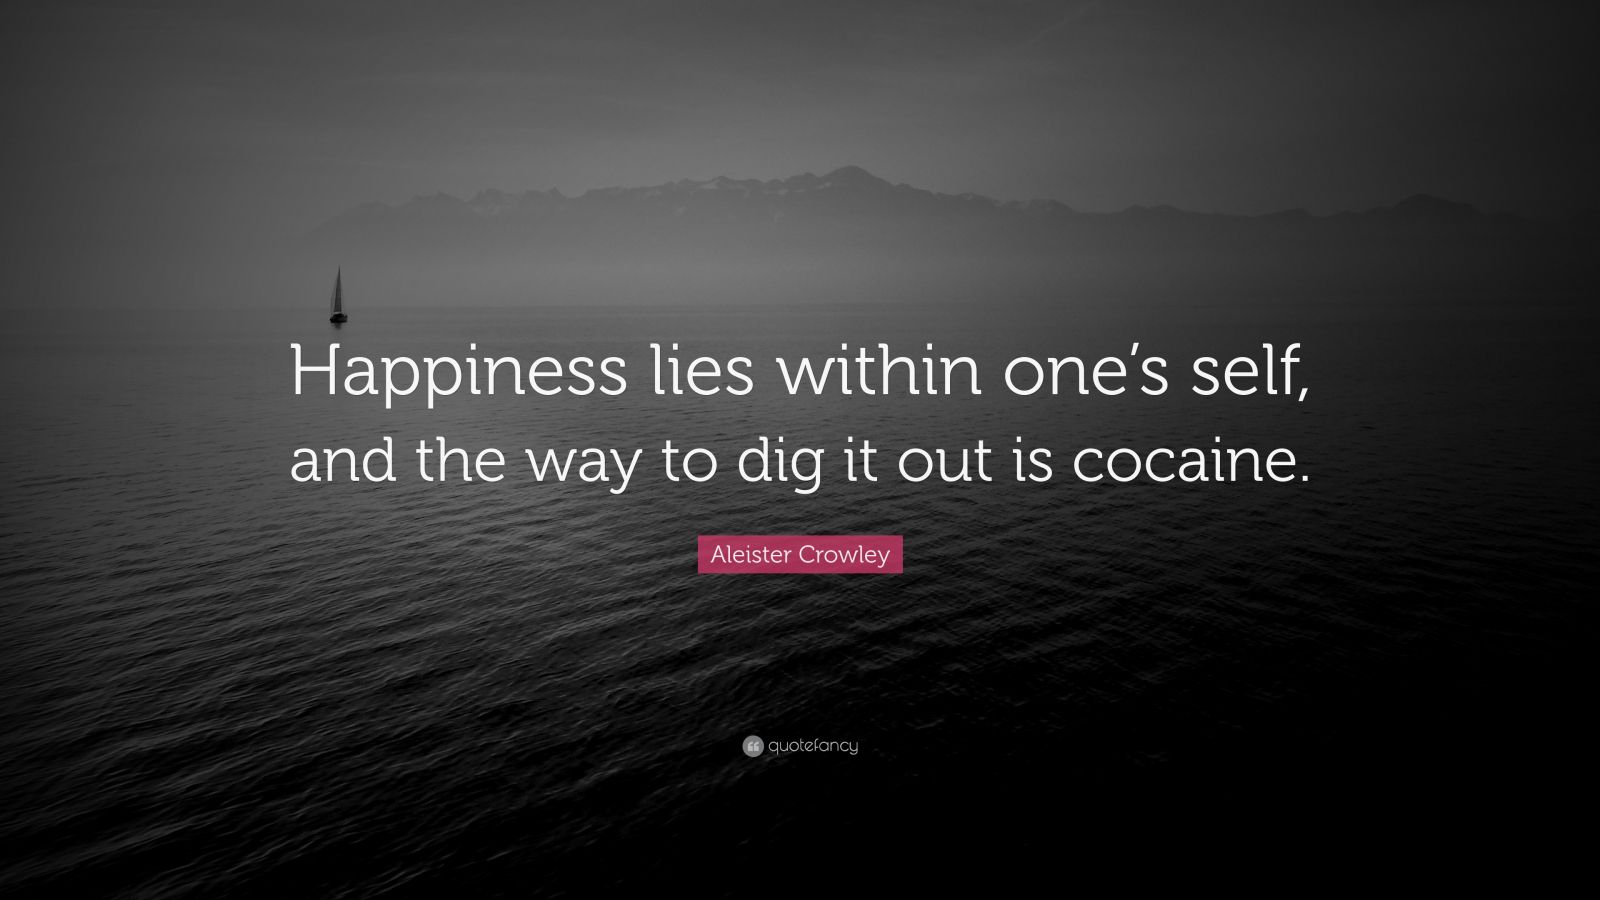 Aleister Crowley Quote: "Happiness lies within one's self ...